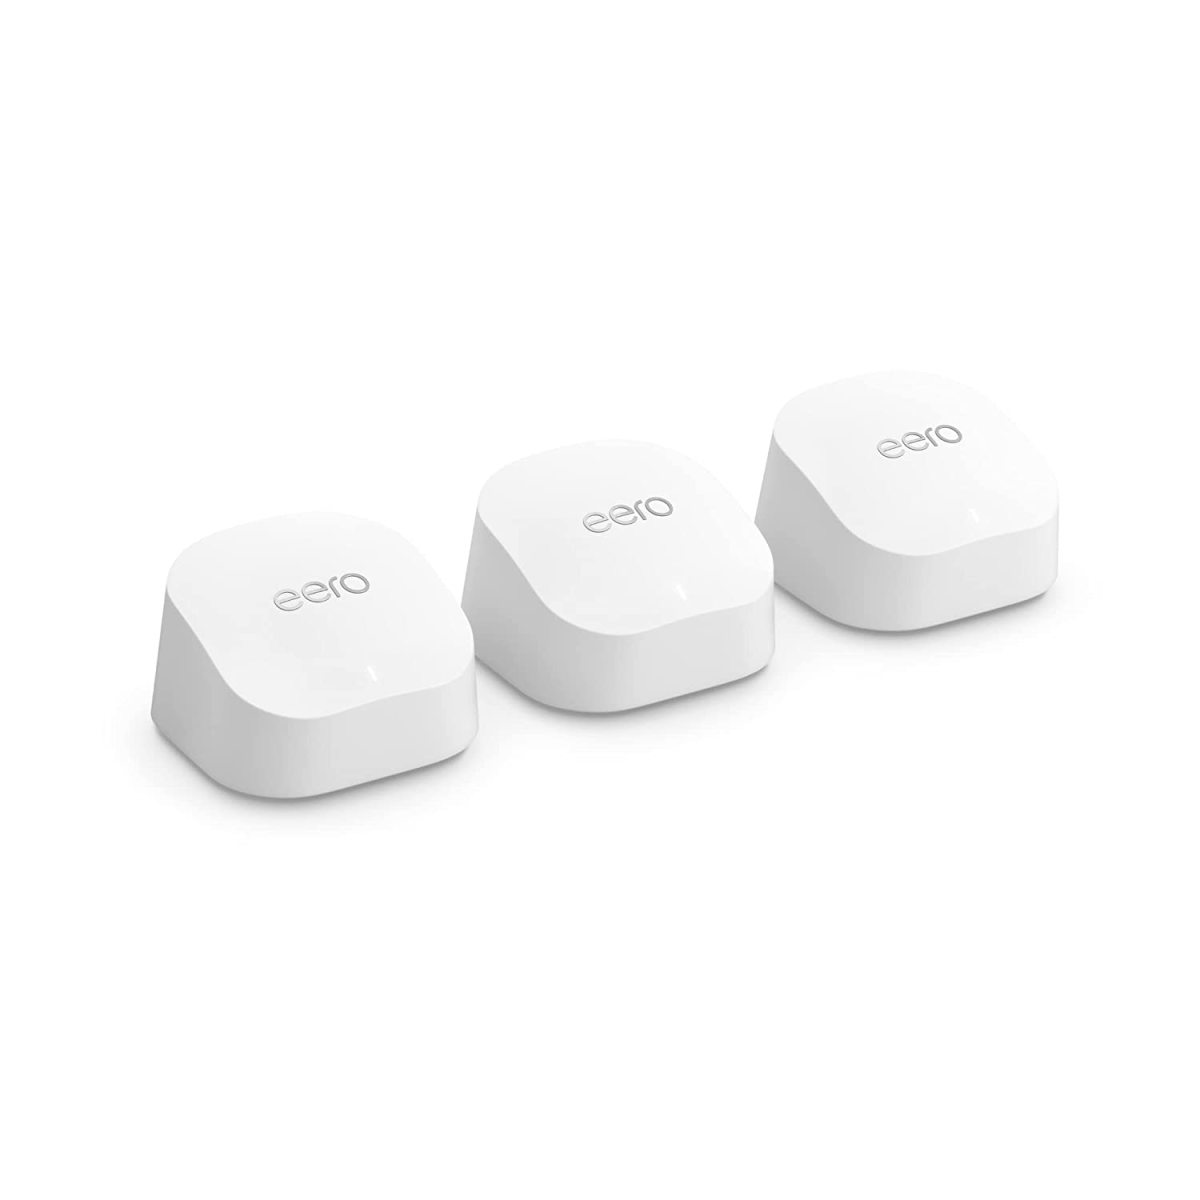 eero 6+ mesh Wi-Fi router/extender three pack